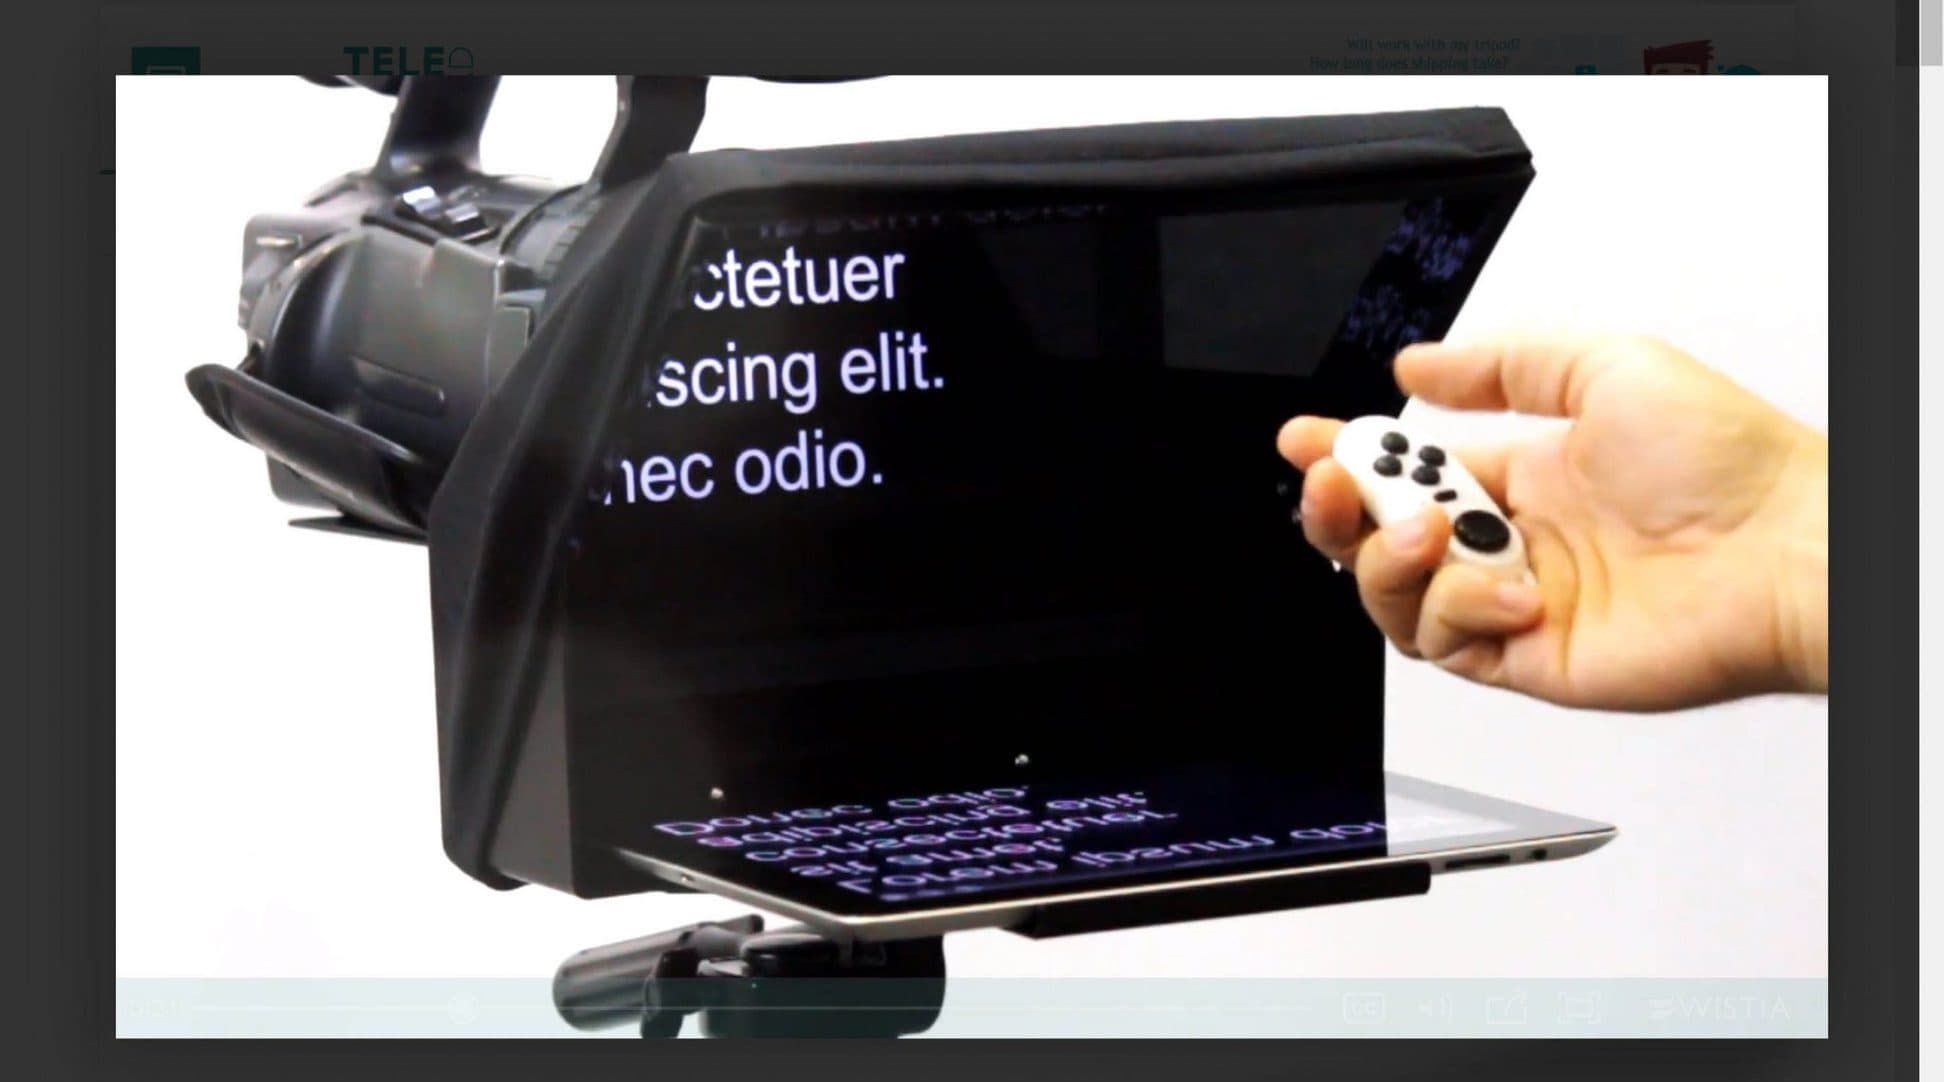 teleprompter meaning